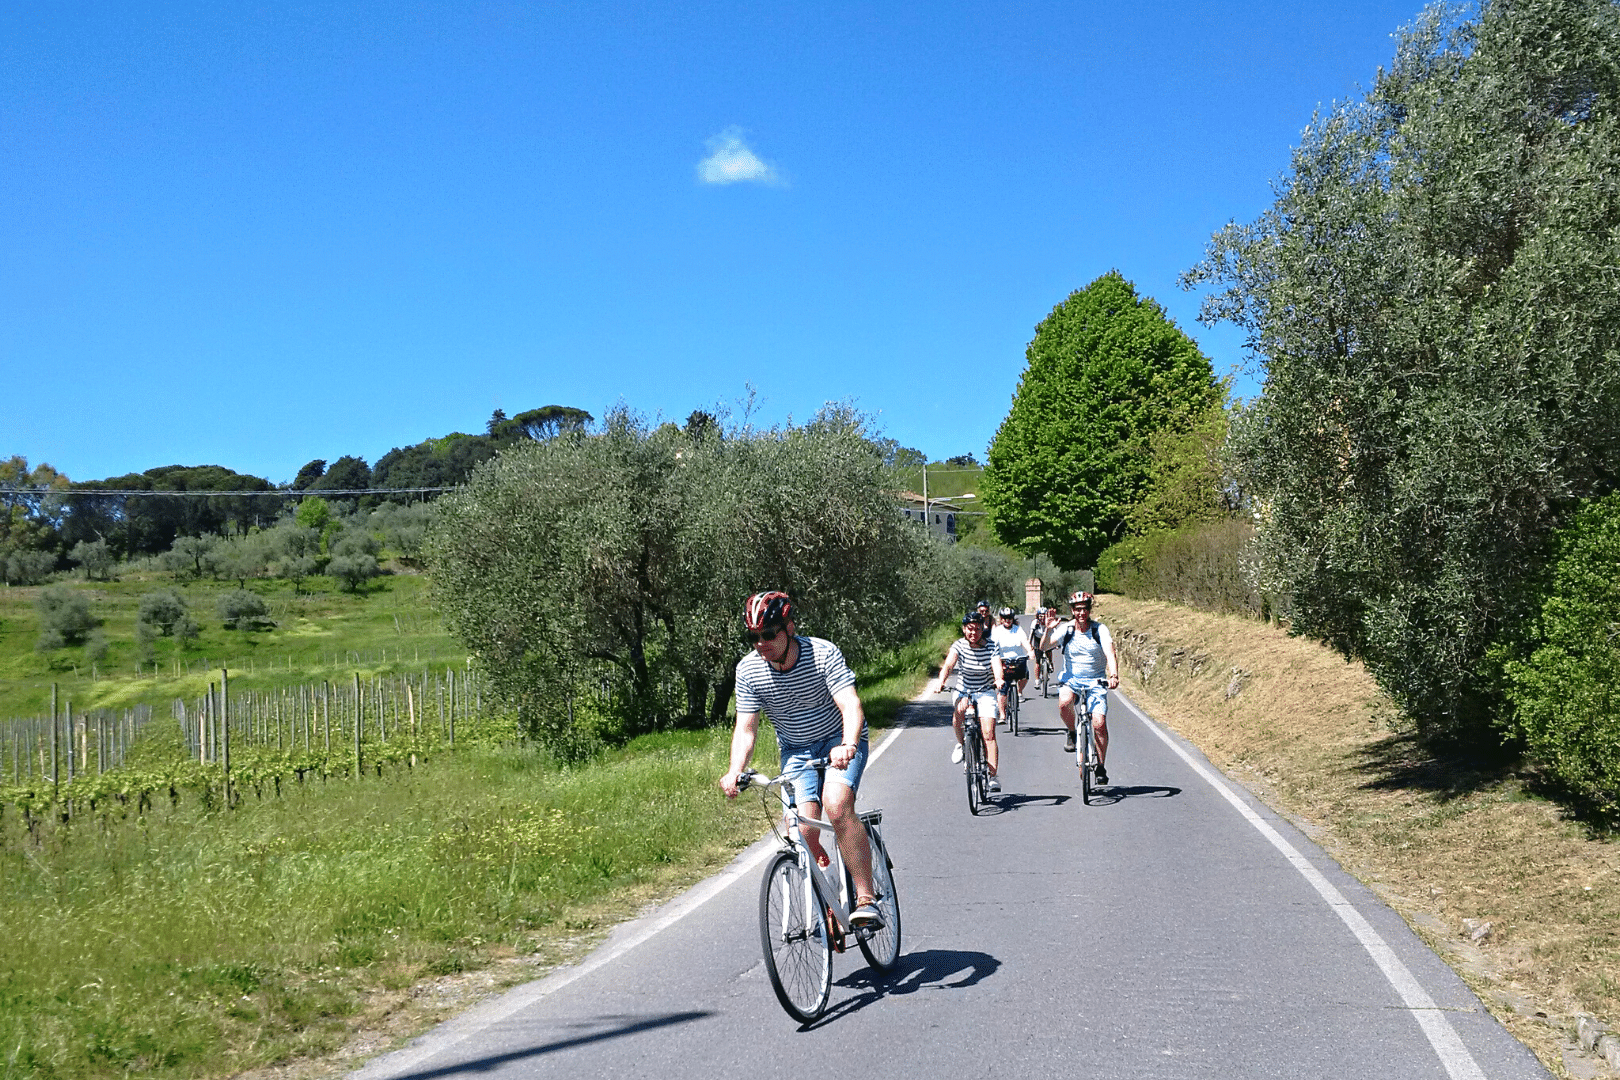 2Italia Cycling and Food & Wine. Cycling with guide in the hills of Lucca. On the way to a vineyard lunch.